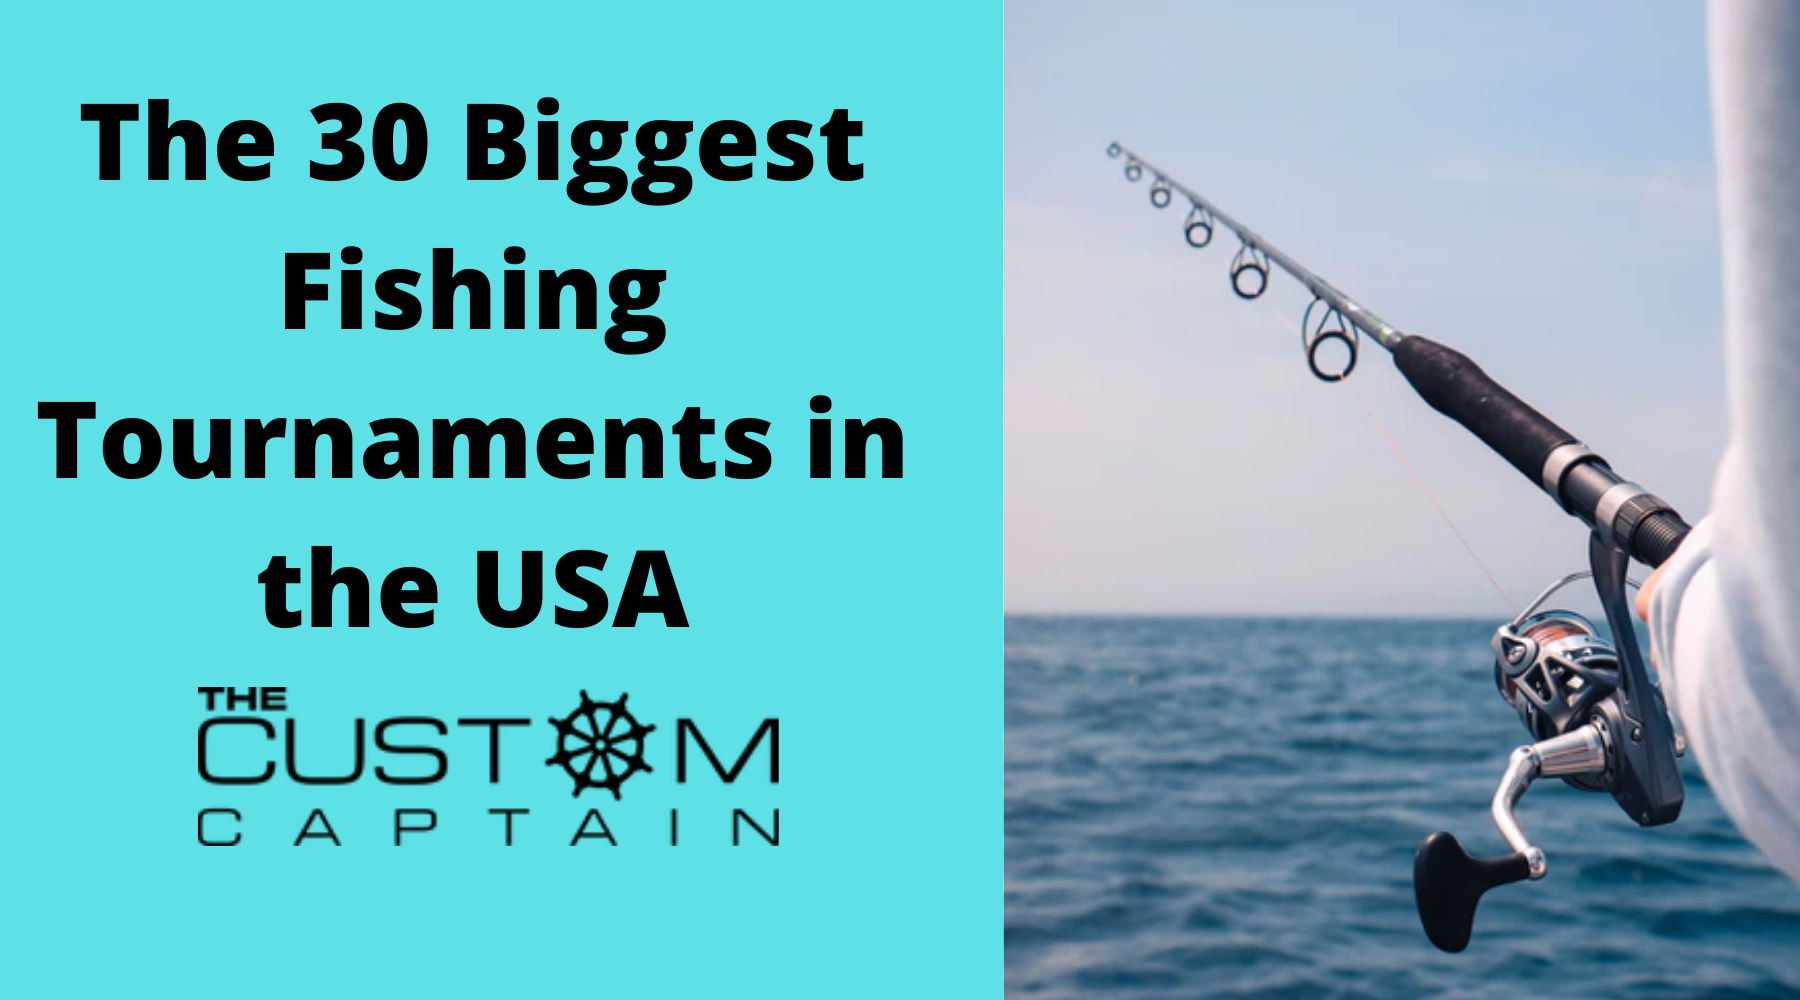 The 30 Biggest Fishing Tournaments in the USA